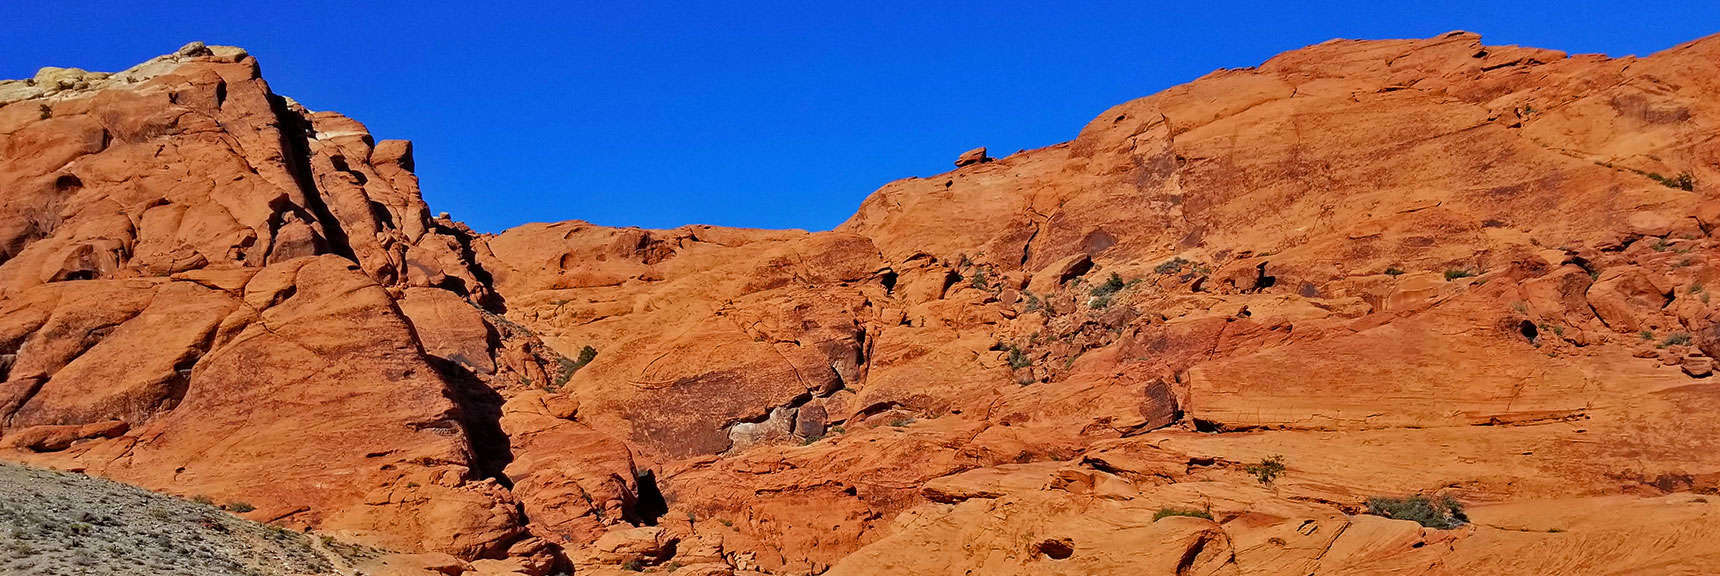 Red Rock National Park View of Calico Hills from 2nd Scenic Drive Turnout